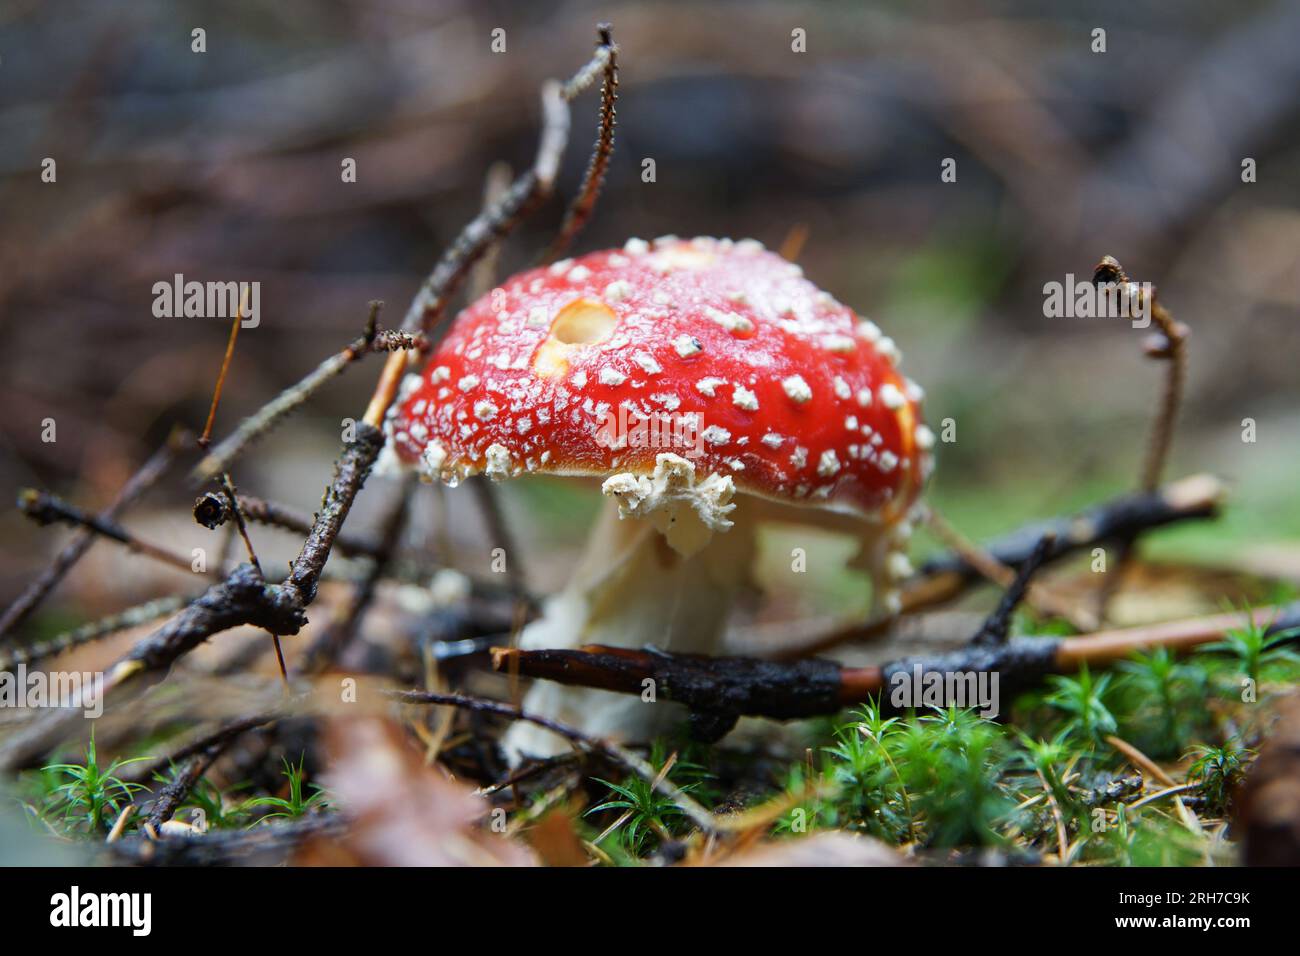 Amanita Muscaria close up in the forest with moss and bran. Red poisonous mushroom with white spots. Stock Photo